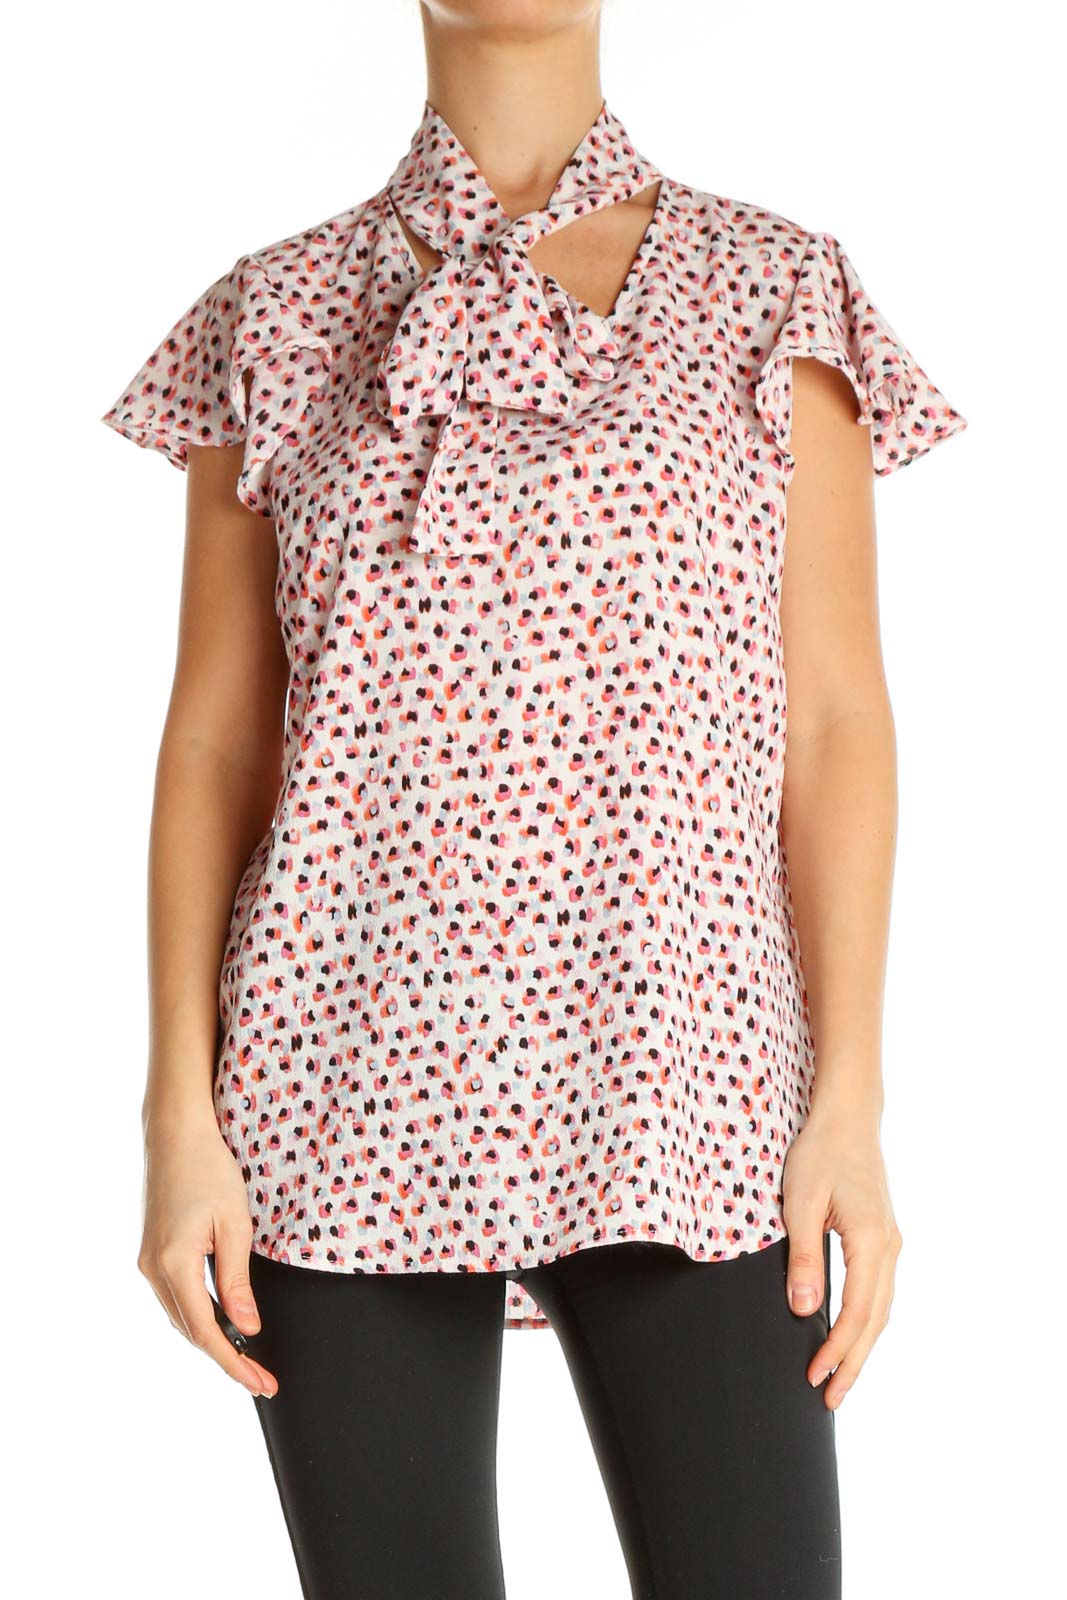 Orange Object Print Casual Shirt Front